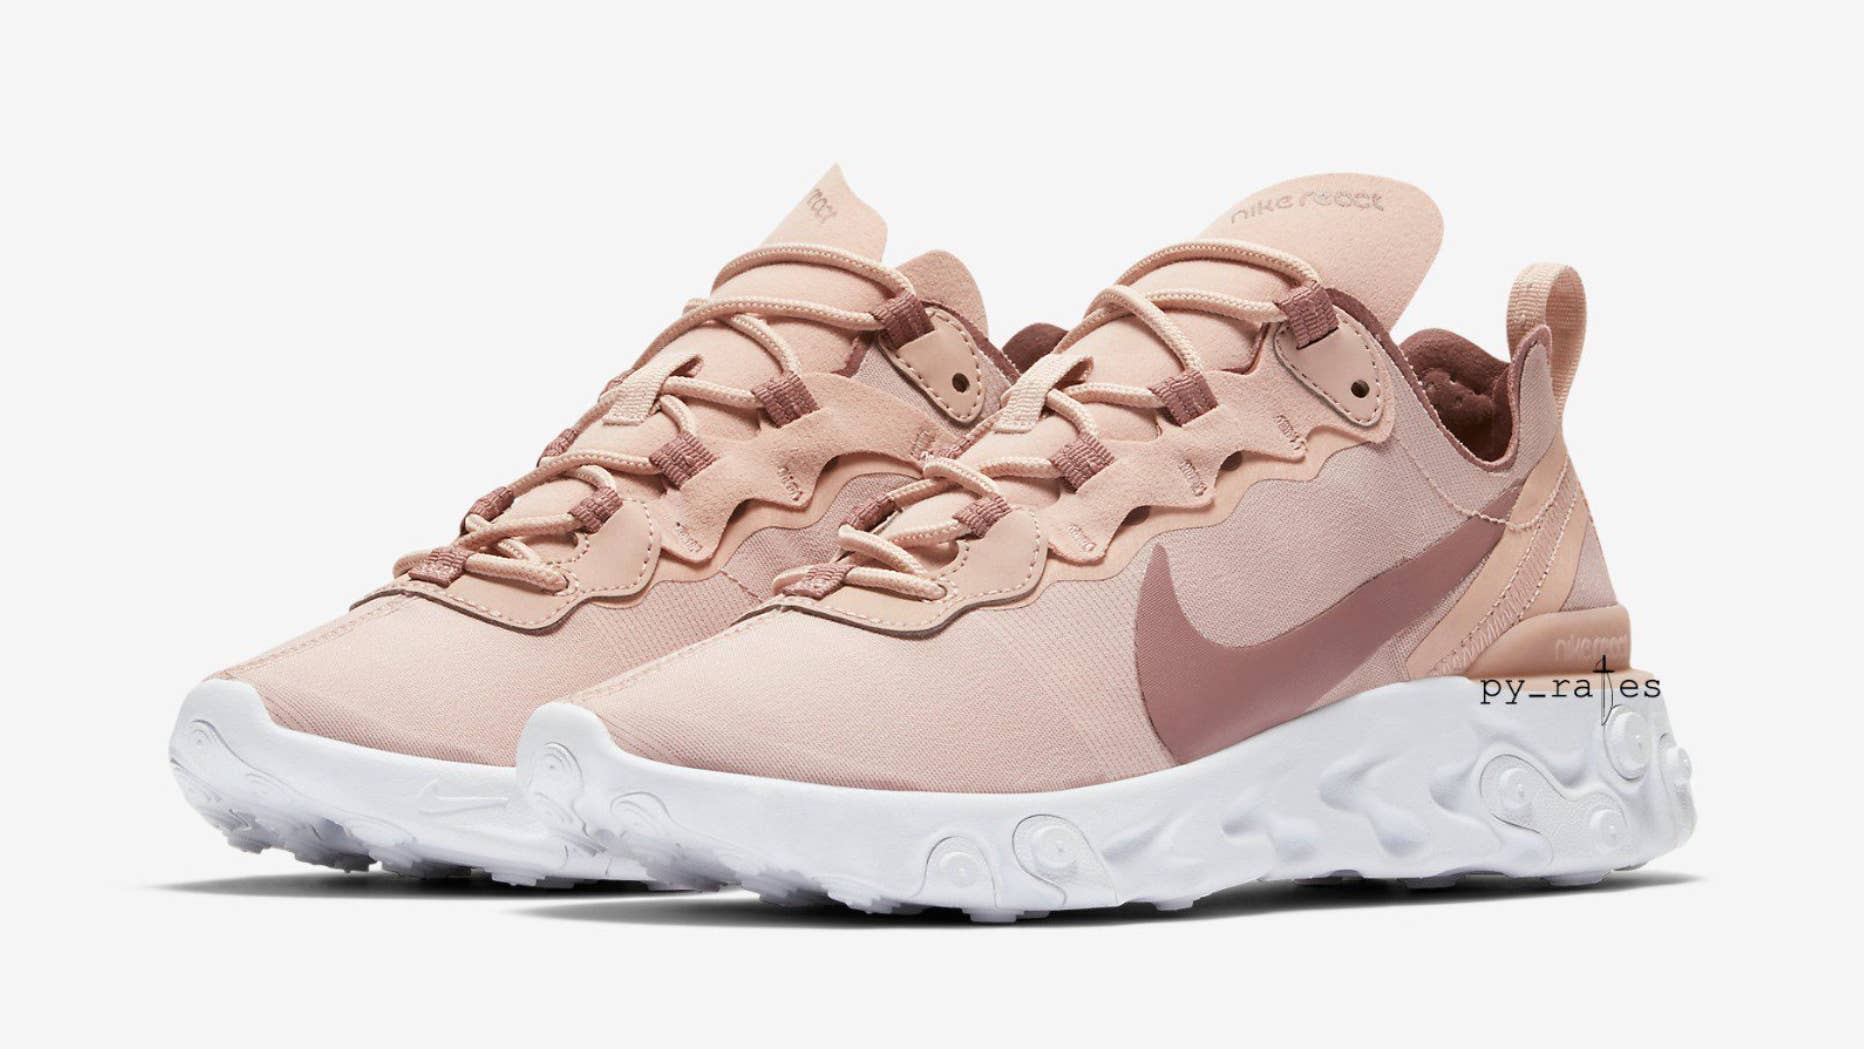 Tidsserier udbrud Reskyd Another Colorway of the Nike React Element 55 | Complex